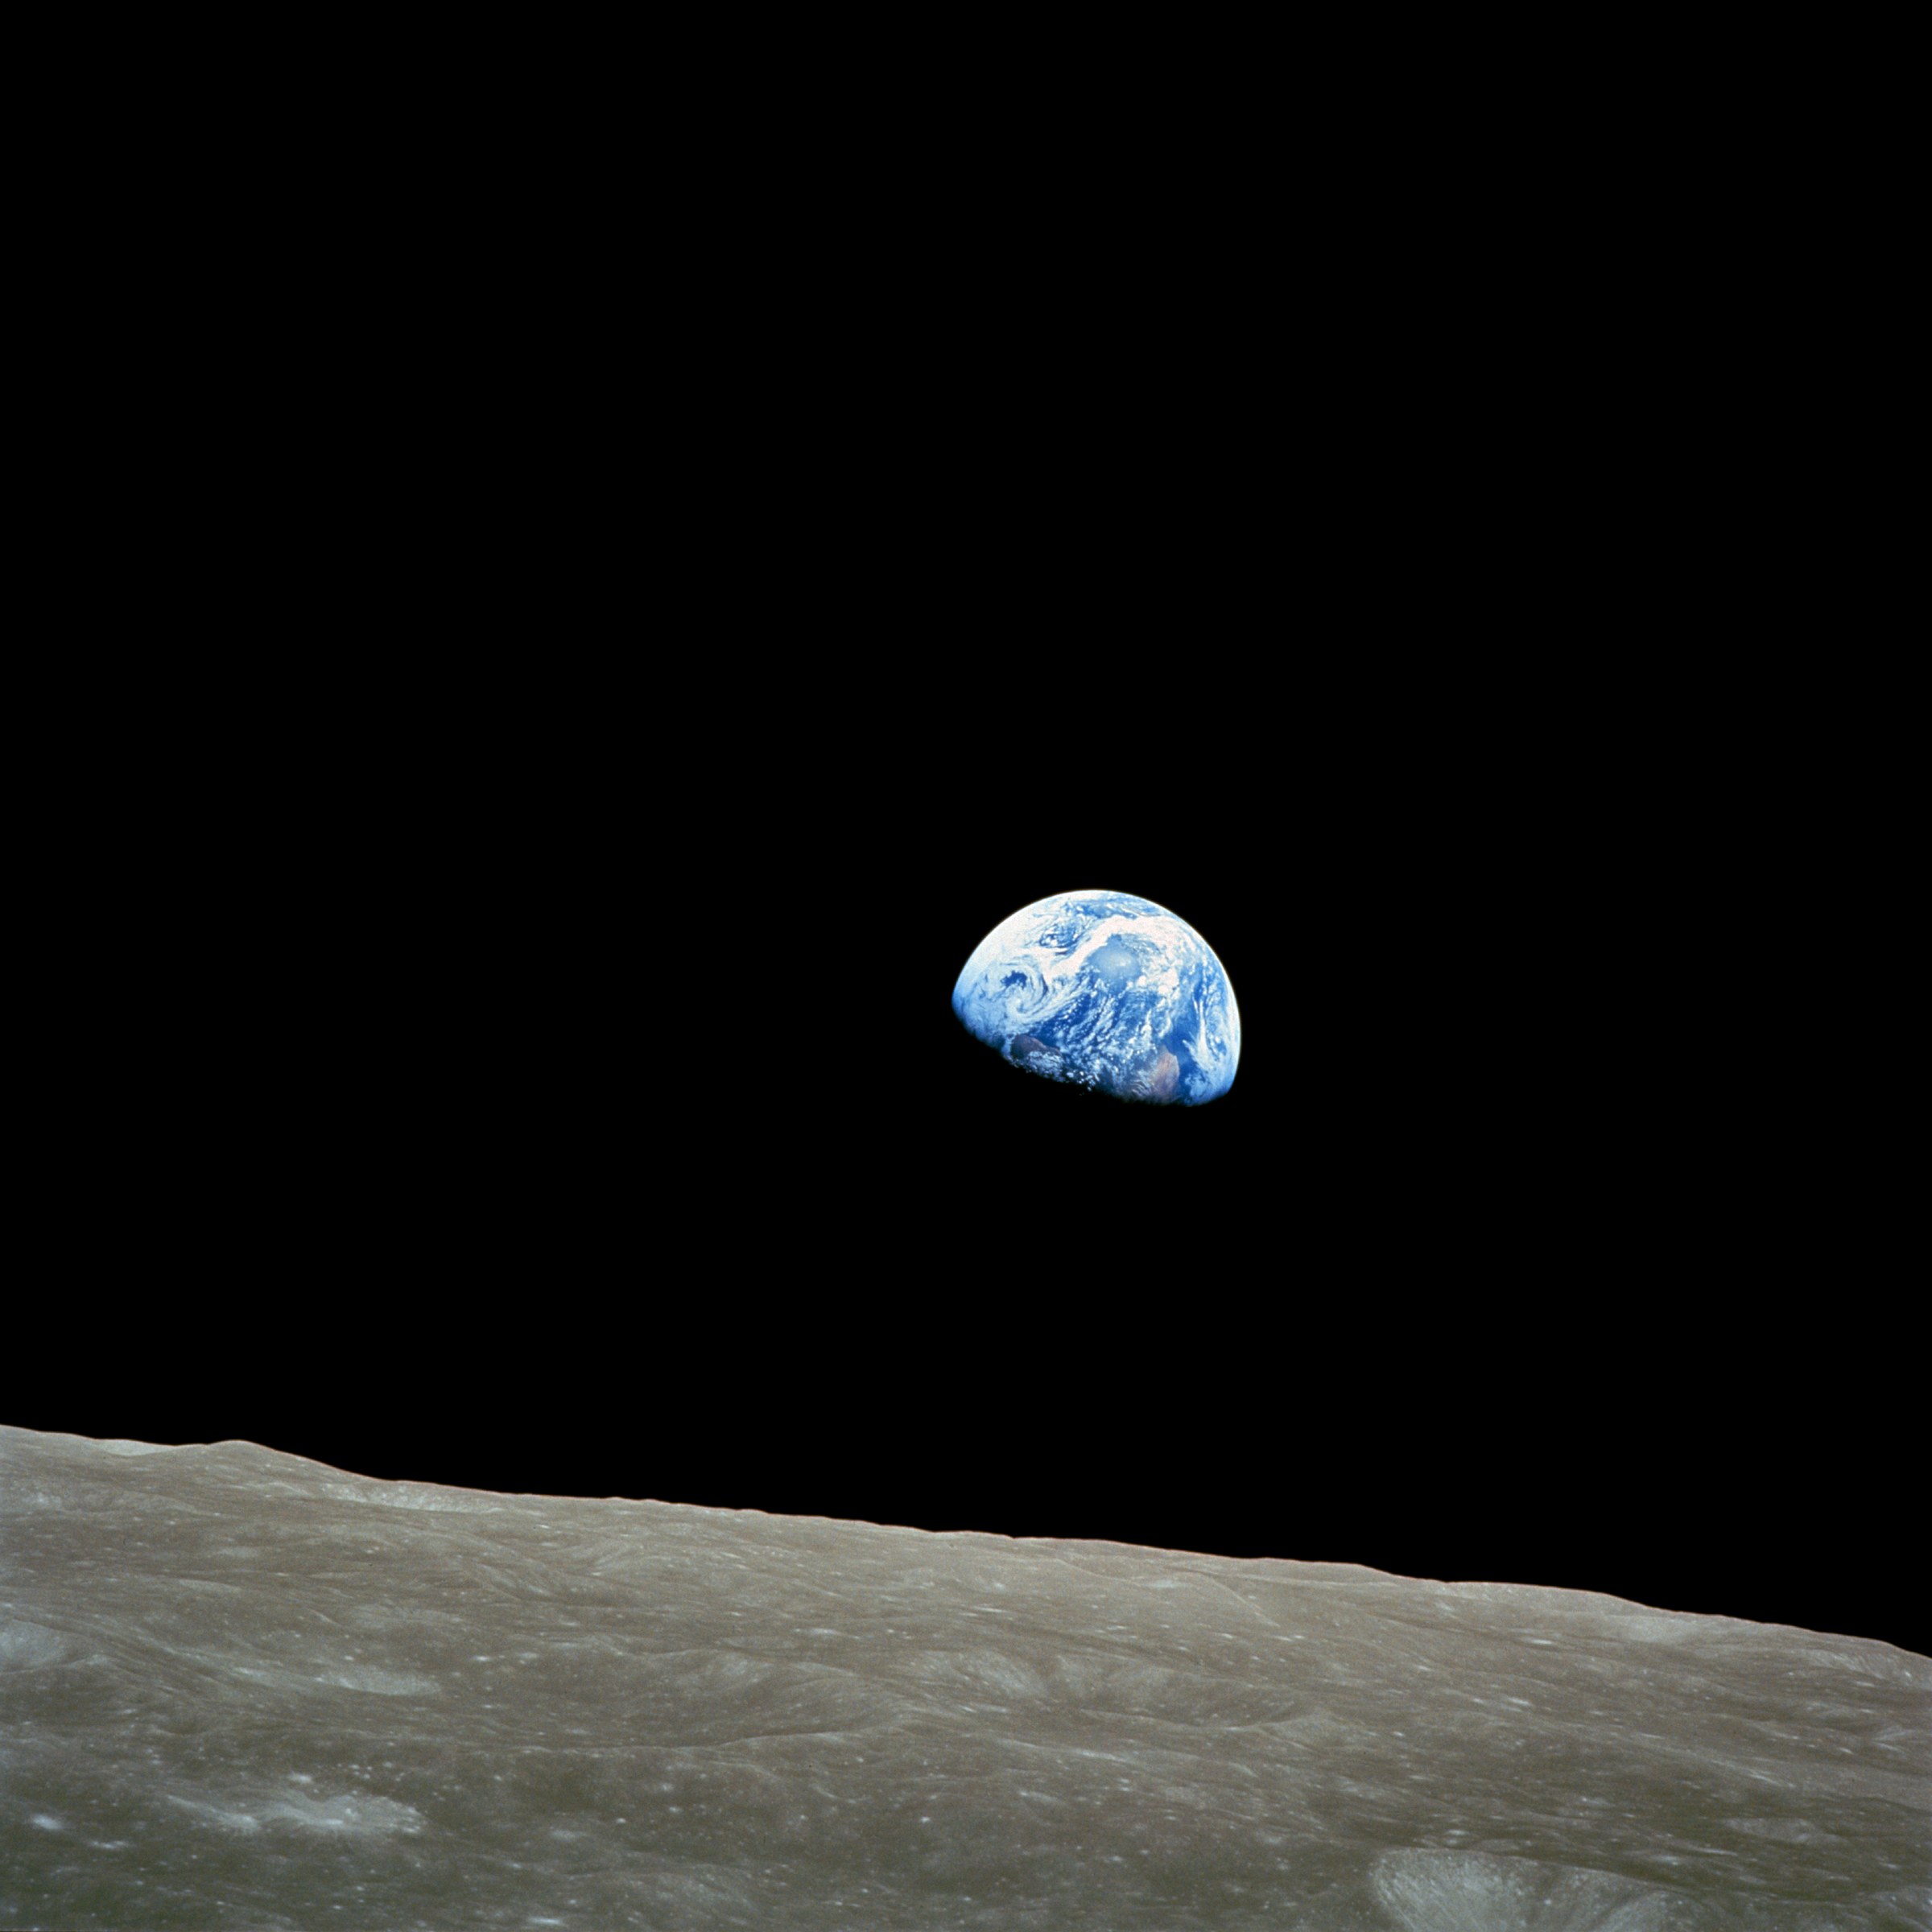 Apollo 8 in December 1968 marked the first occasion on which humans had departed Earth's gravitational "well", entered cislunar space and traveled to the Moon. The flight design originated from the "E-mission" of Apollo 3. Photo Credit: NASA